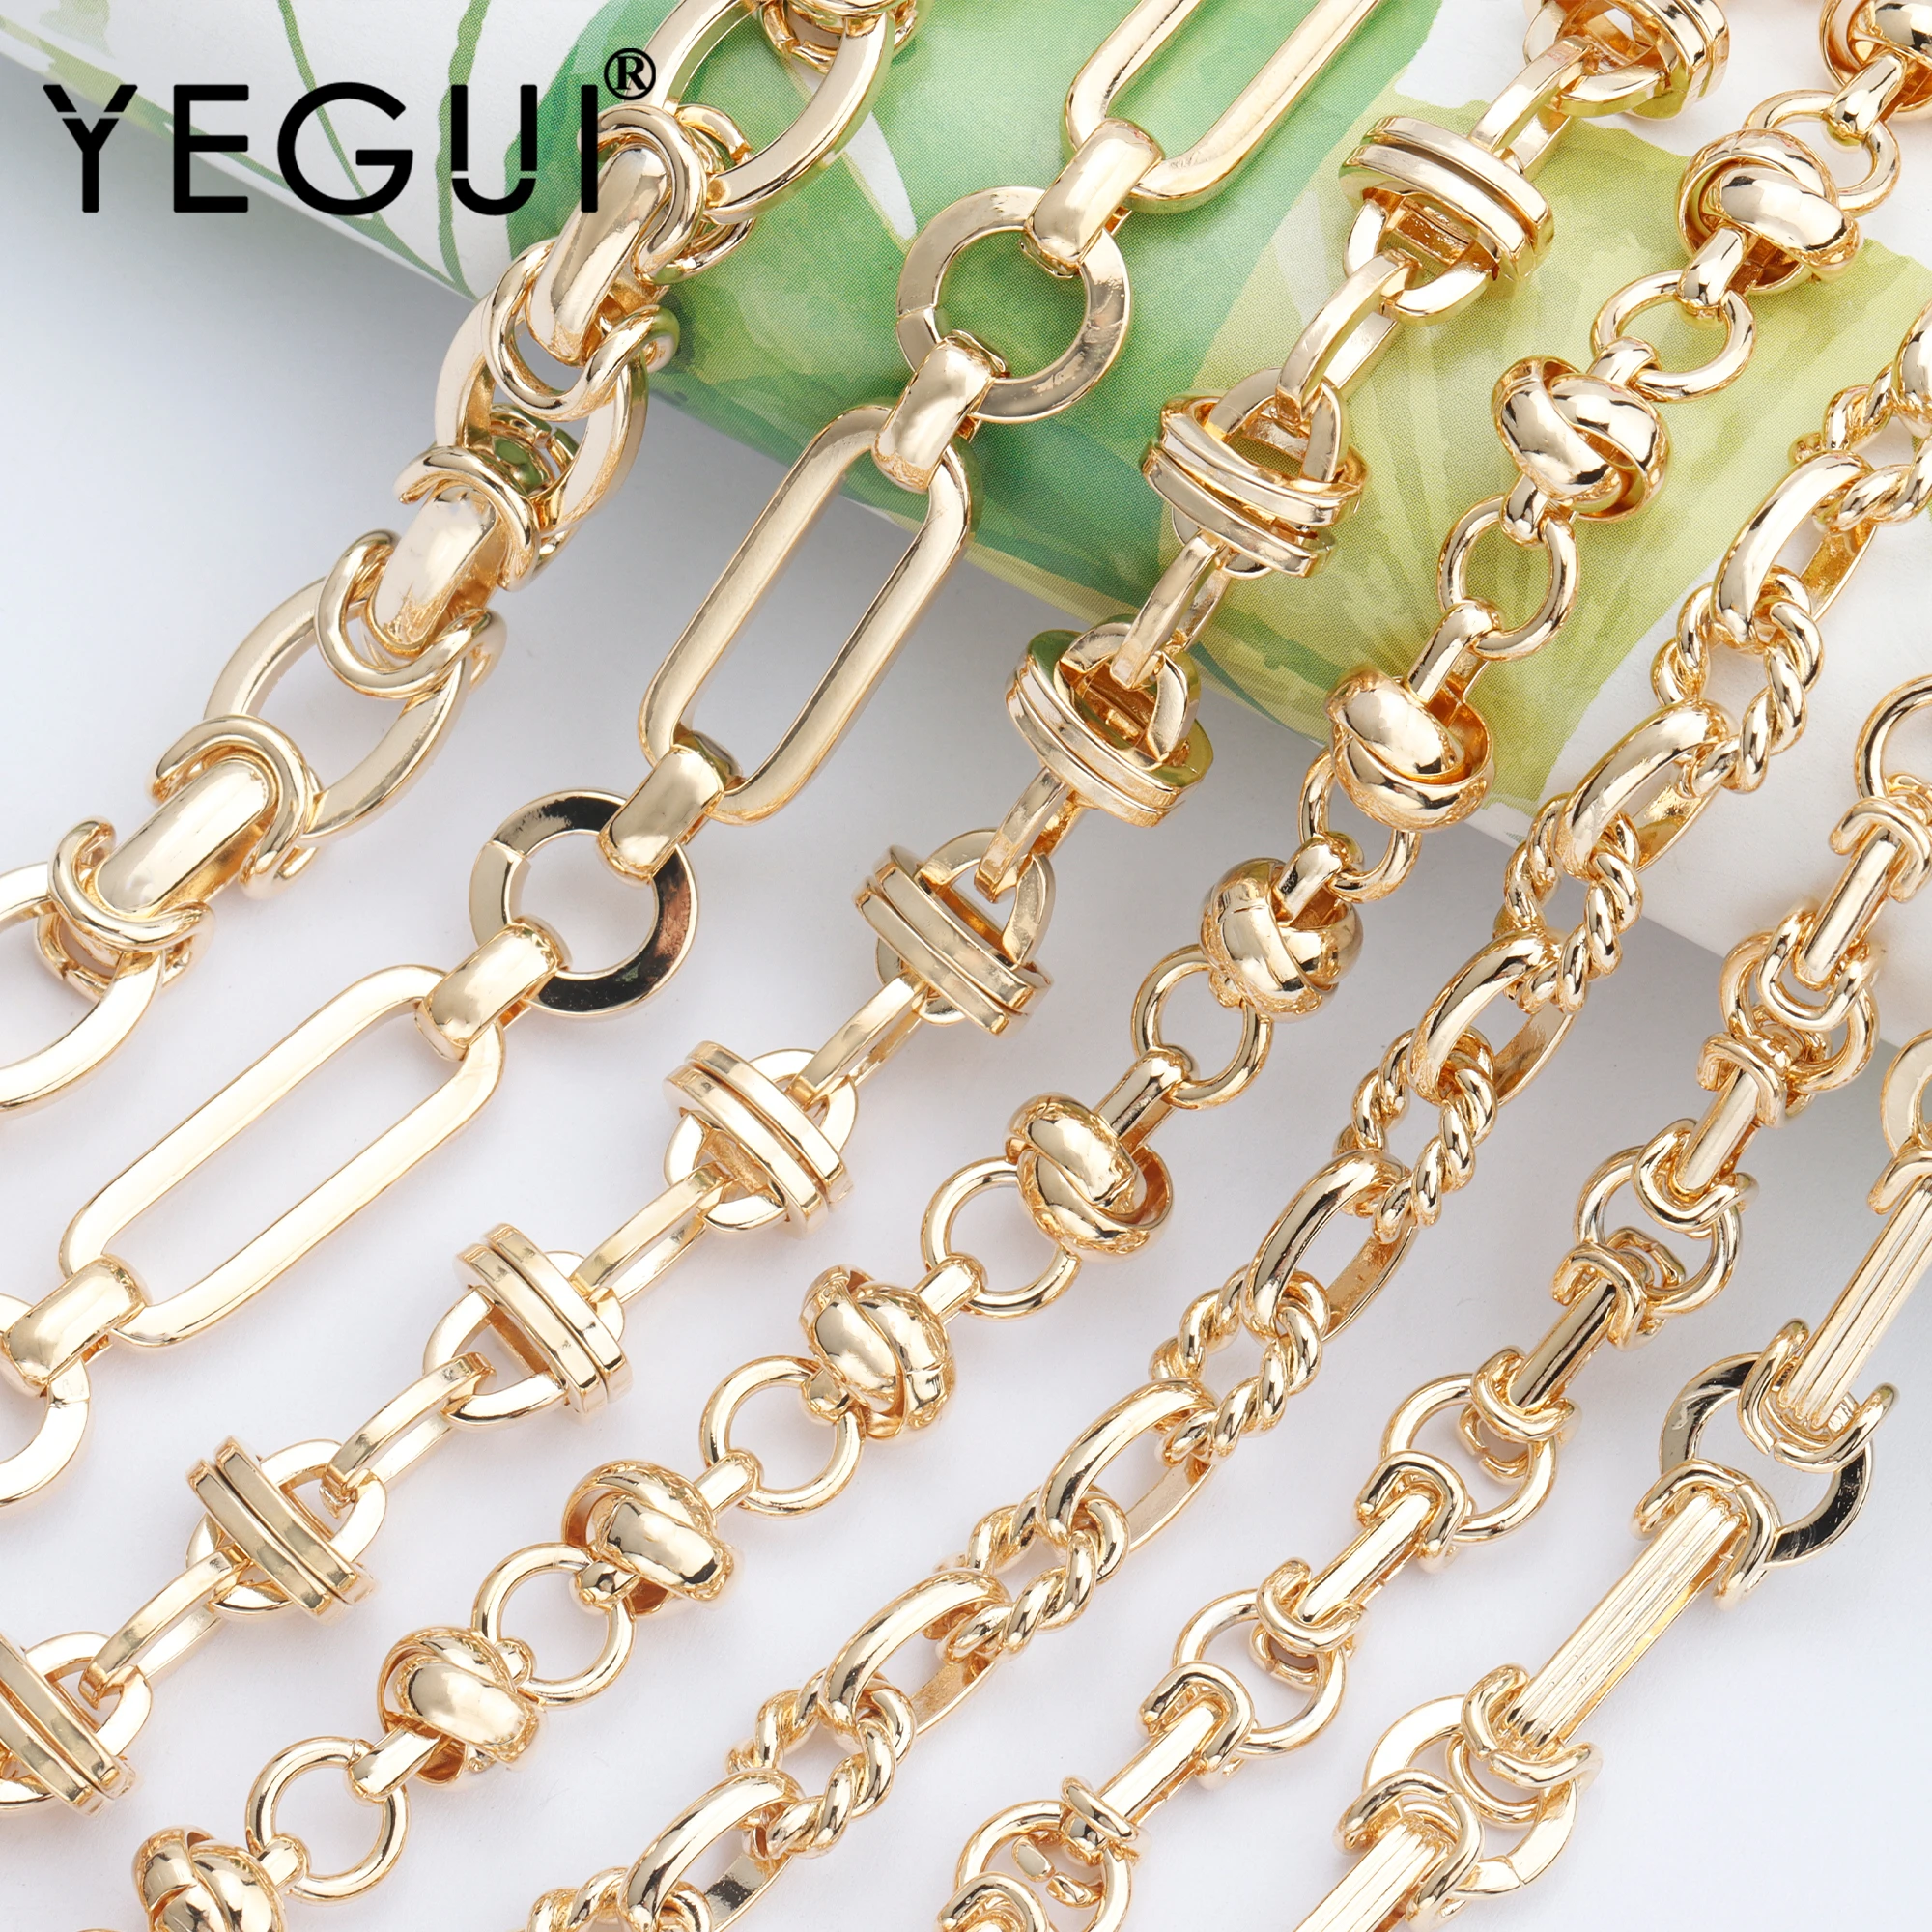 YEGUI C122,jewelry accessories,diy chain,18k gold plated,0.3 microns,hand made,diy bracelet necklace,jewelry making,1m/lot